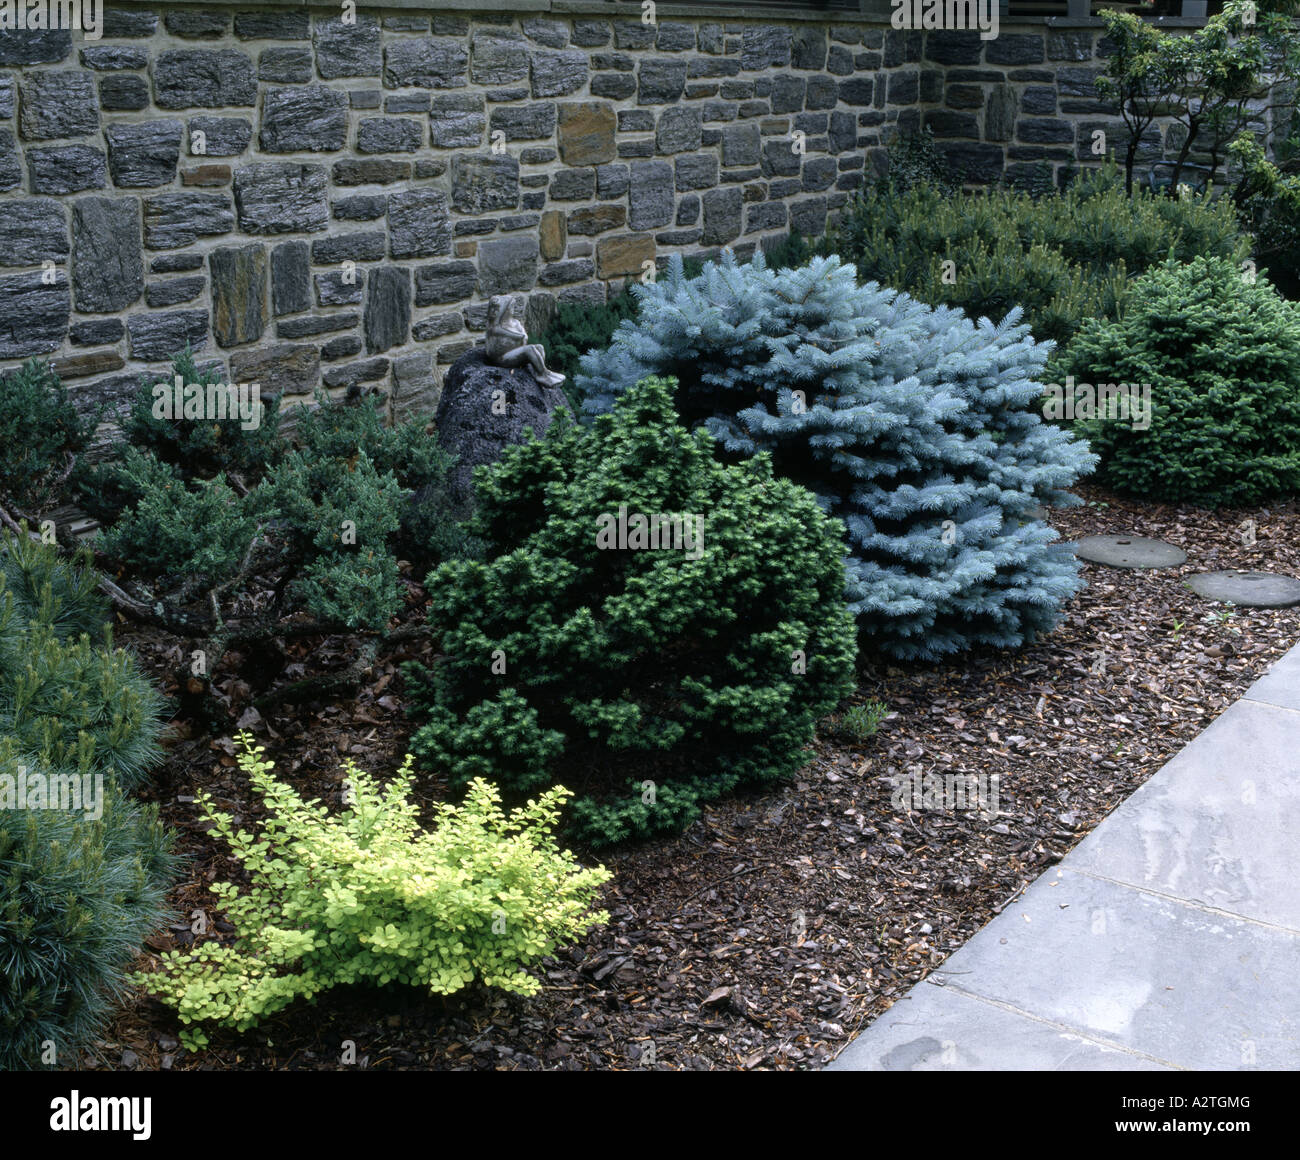 FOUNDATION PLANTING WITH SEVERAL PLANT SPECIES Stock Photo